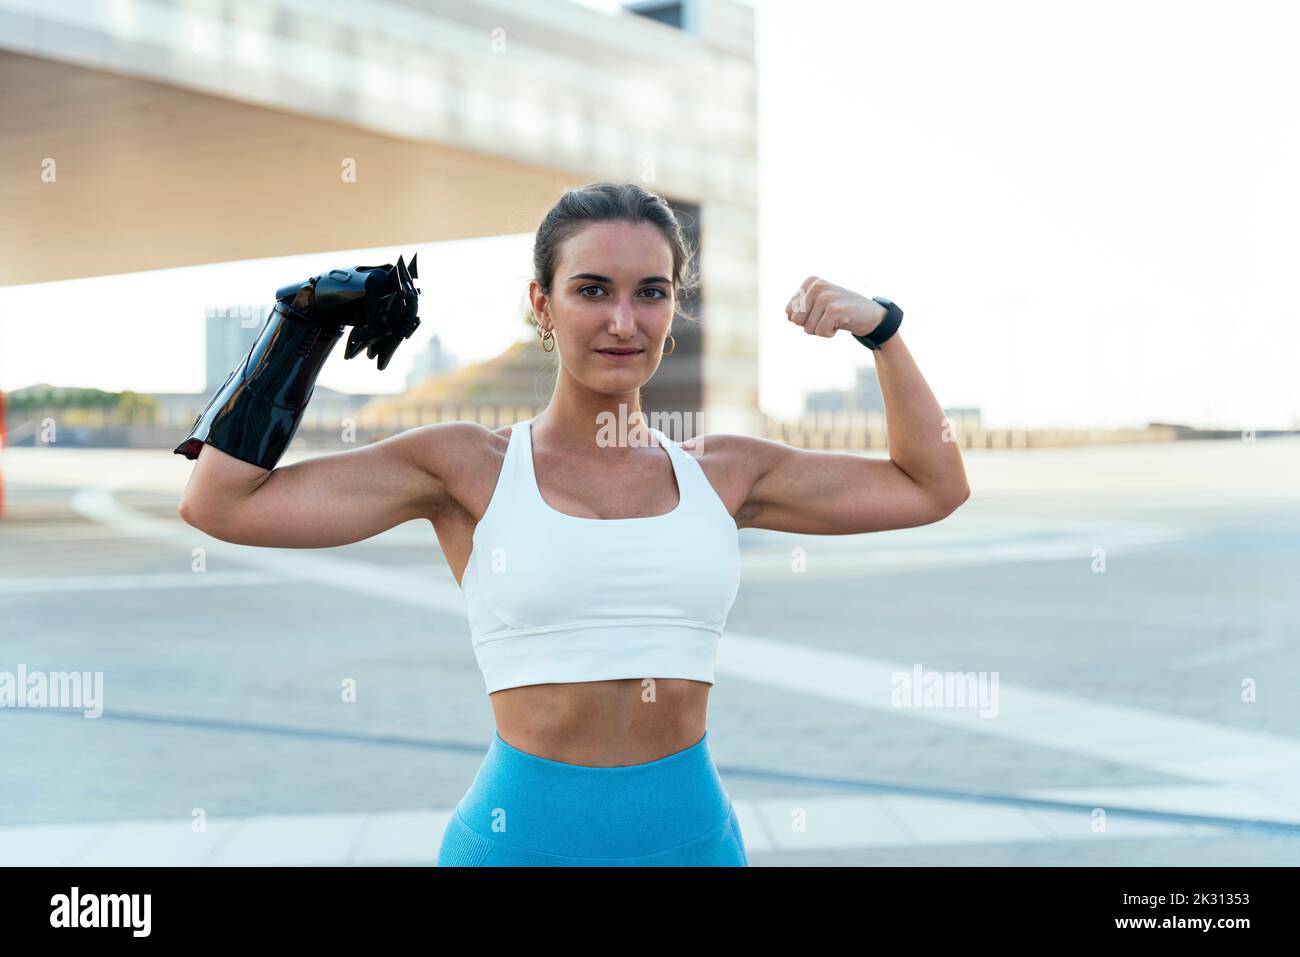 Smiling woman with arm prosthesis flexing muscles Stock Photo